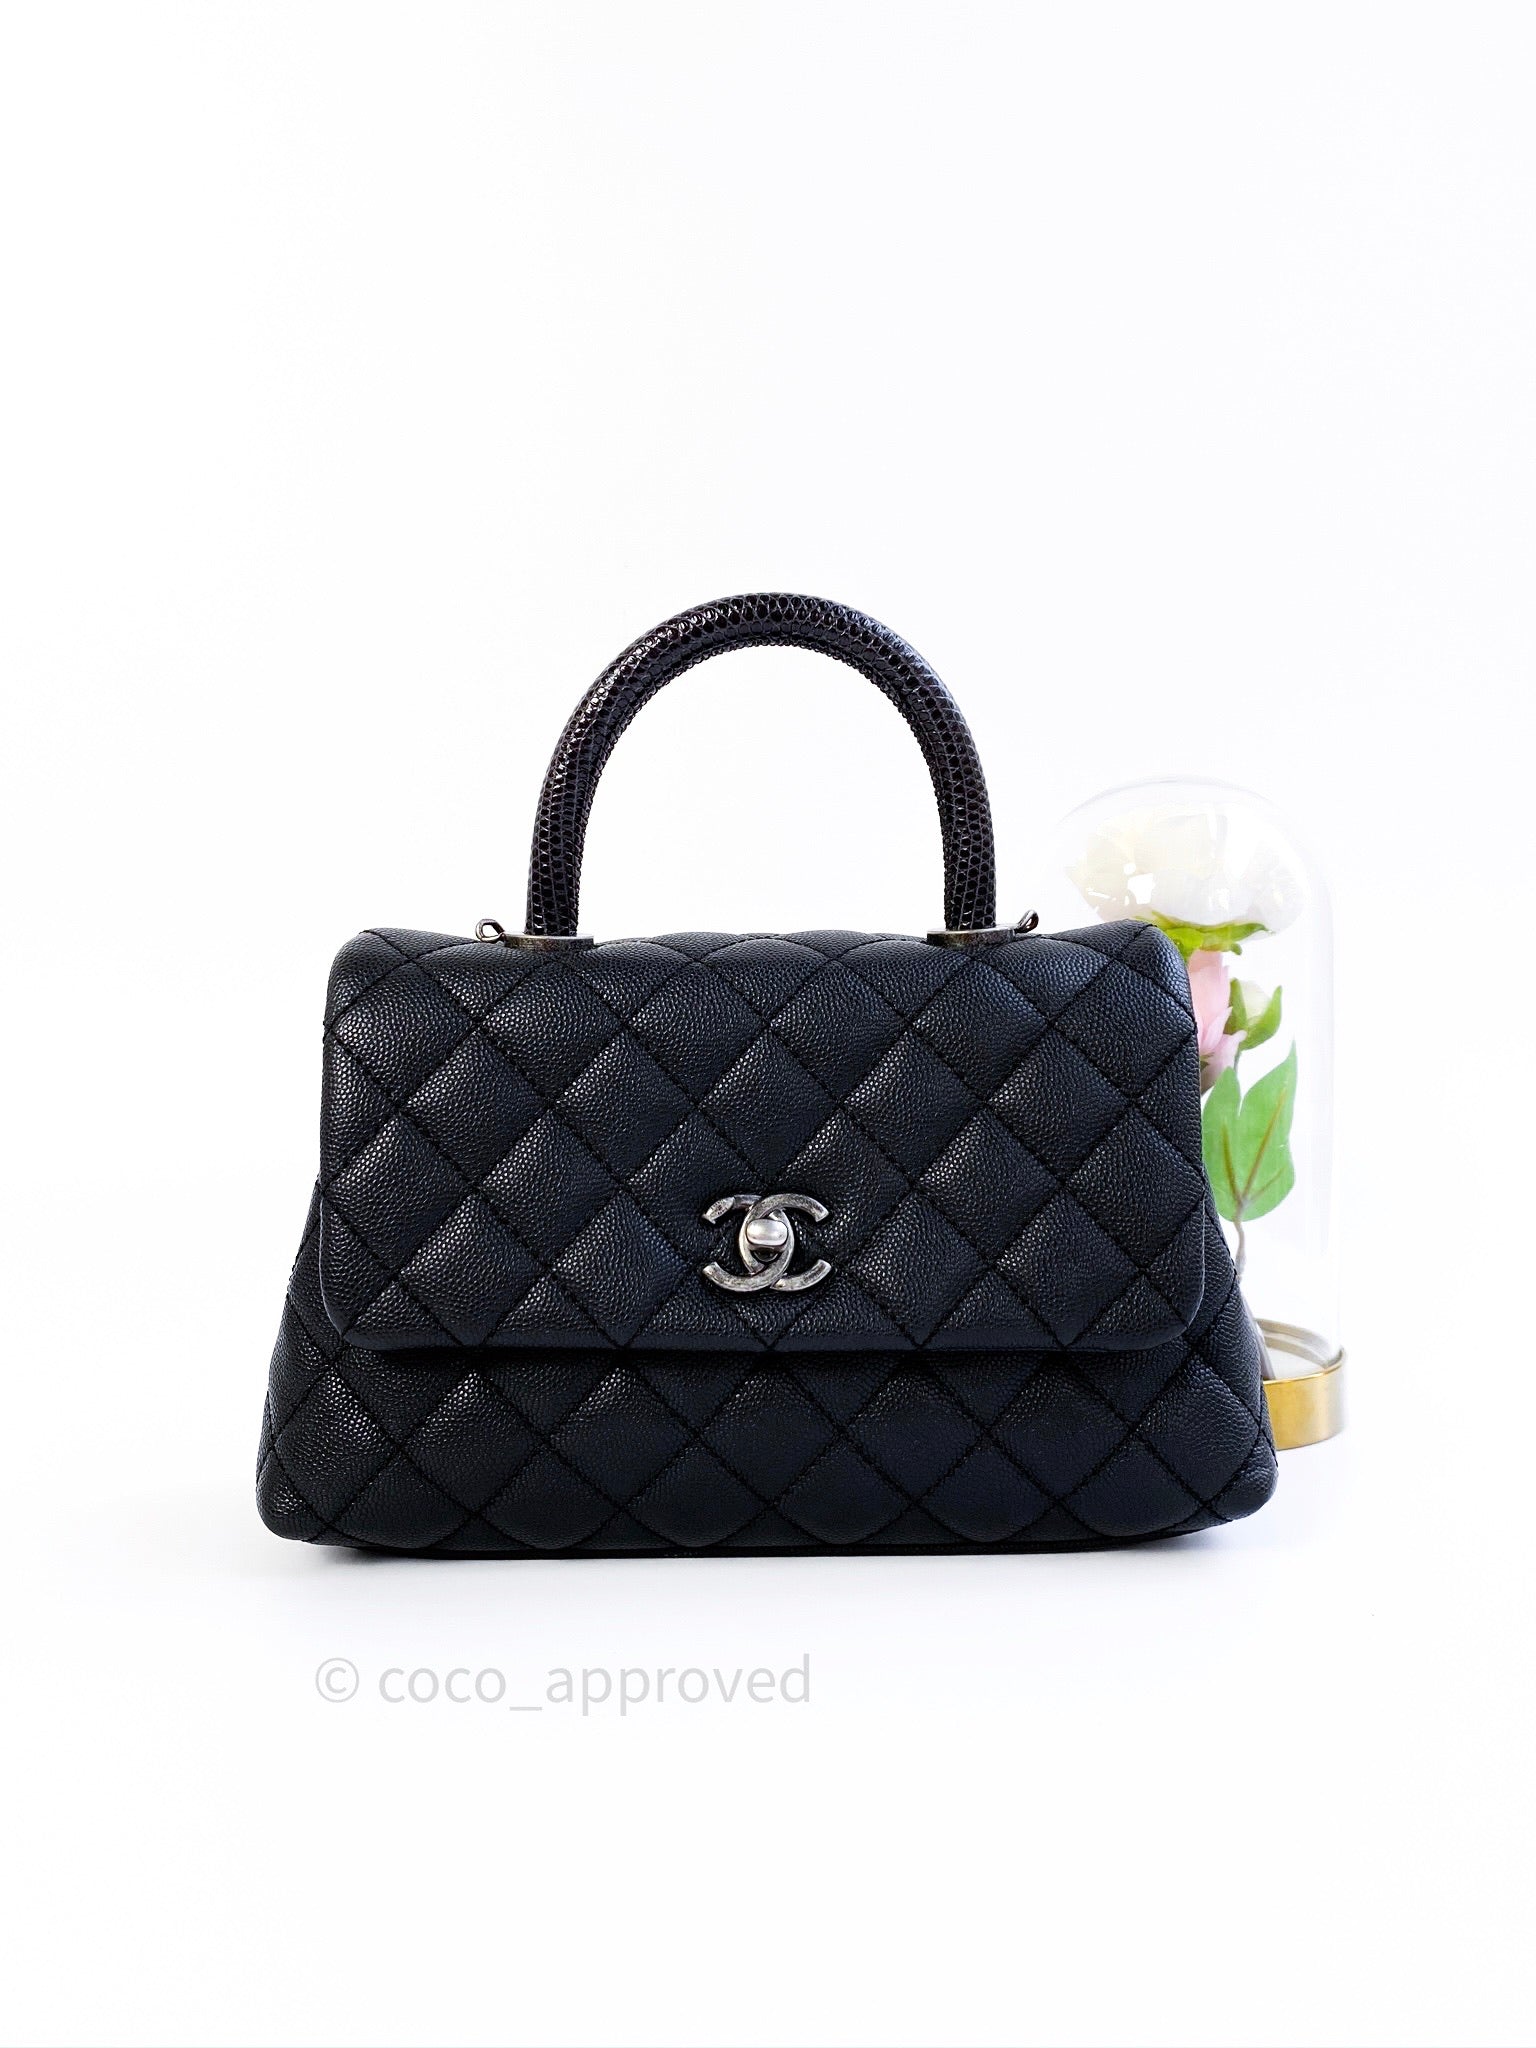 red caviar chanel bag authentic